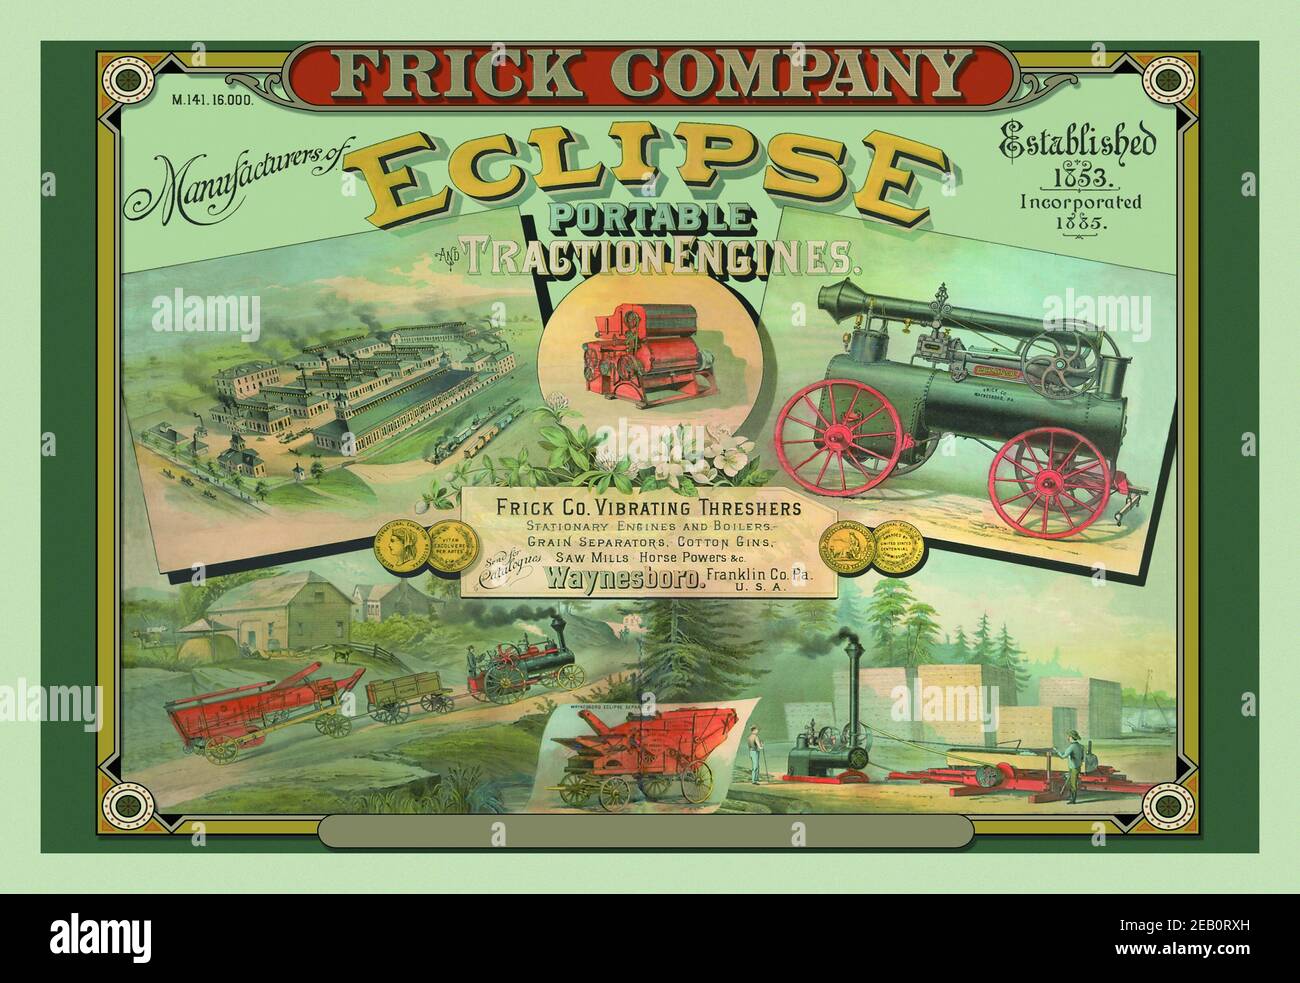 Frick Company - Eclipse Portable Traction Engines Stock Photo